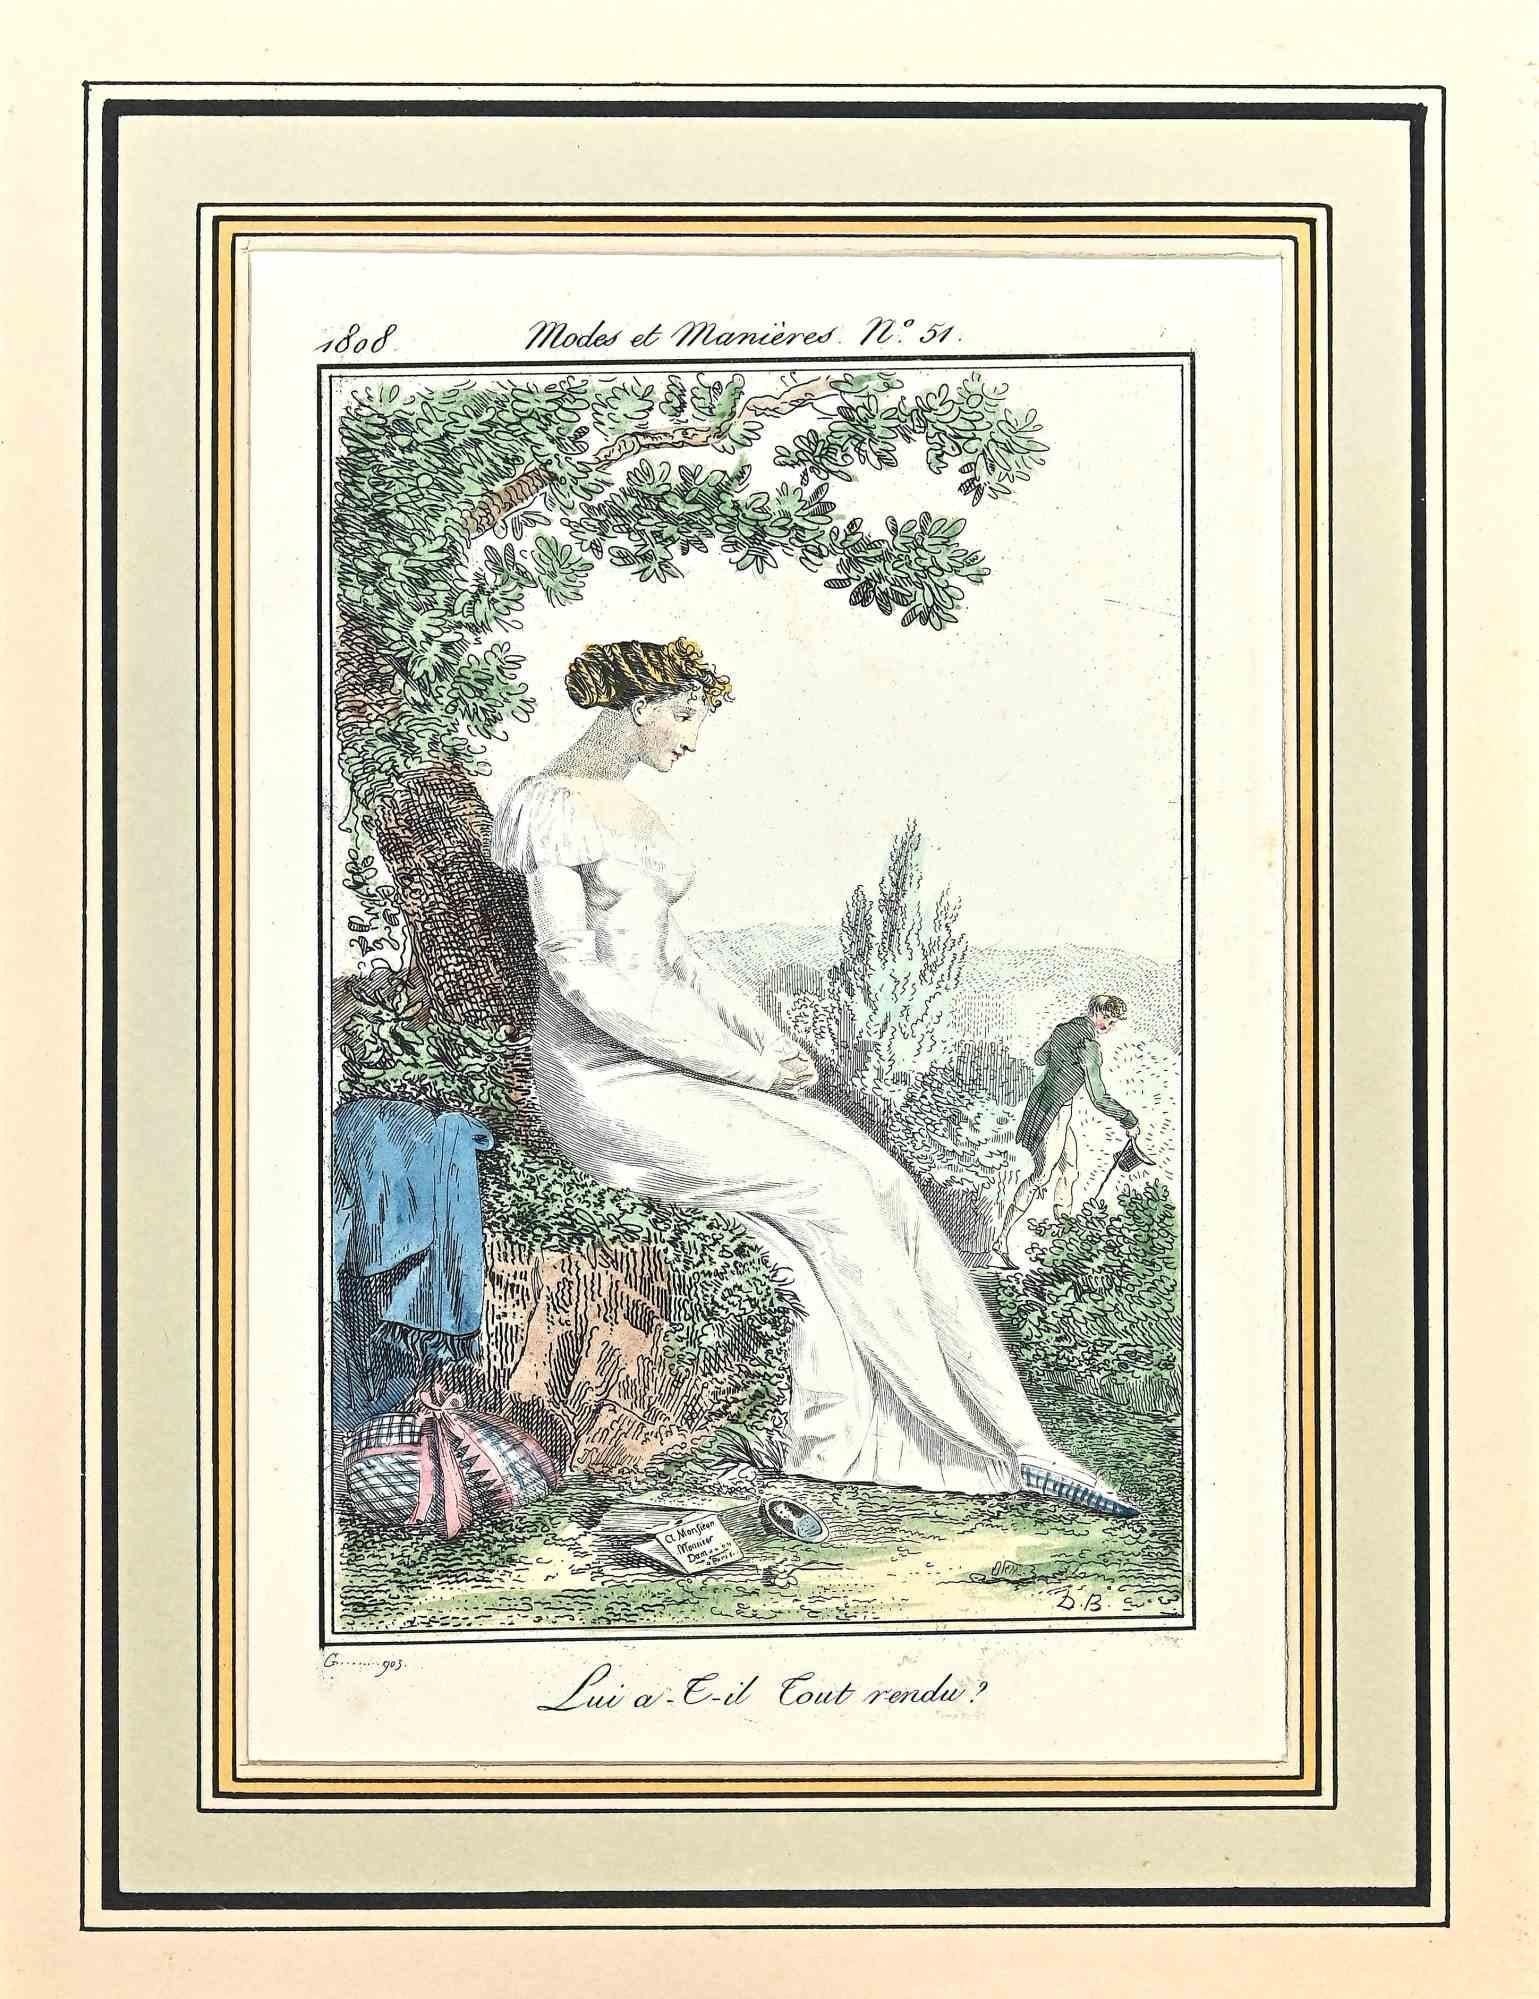 Lui A-T-Il Tout Vendu? is an Original Etching Hand Watercolored series "Costumes Parisiens" published in 1797 by the Journald des Dames et des Modes".

Costume Parisien - Model n. 51 is an original watercolored print realized in 1797. 

The artwork